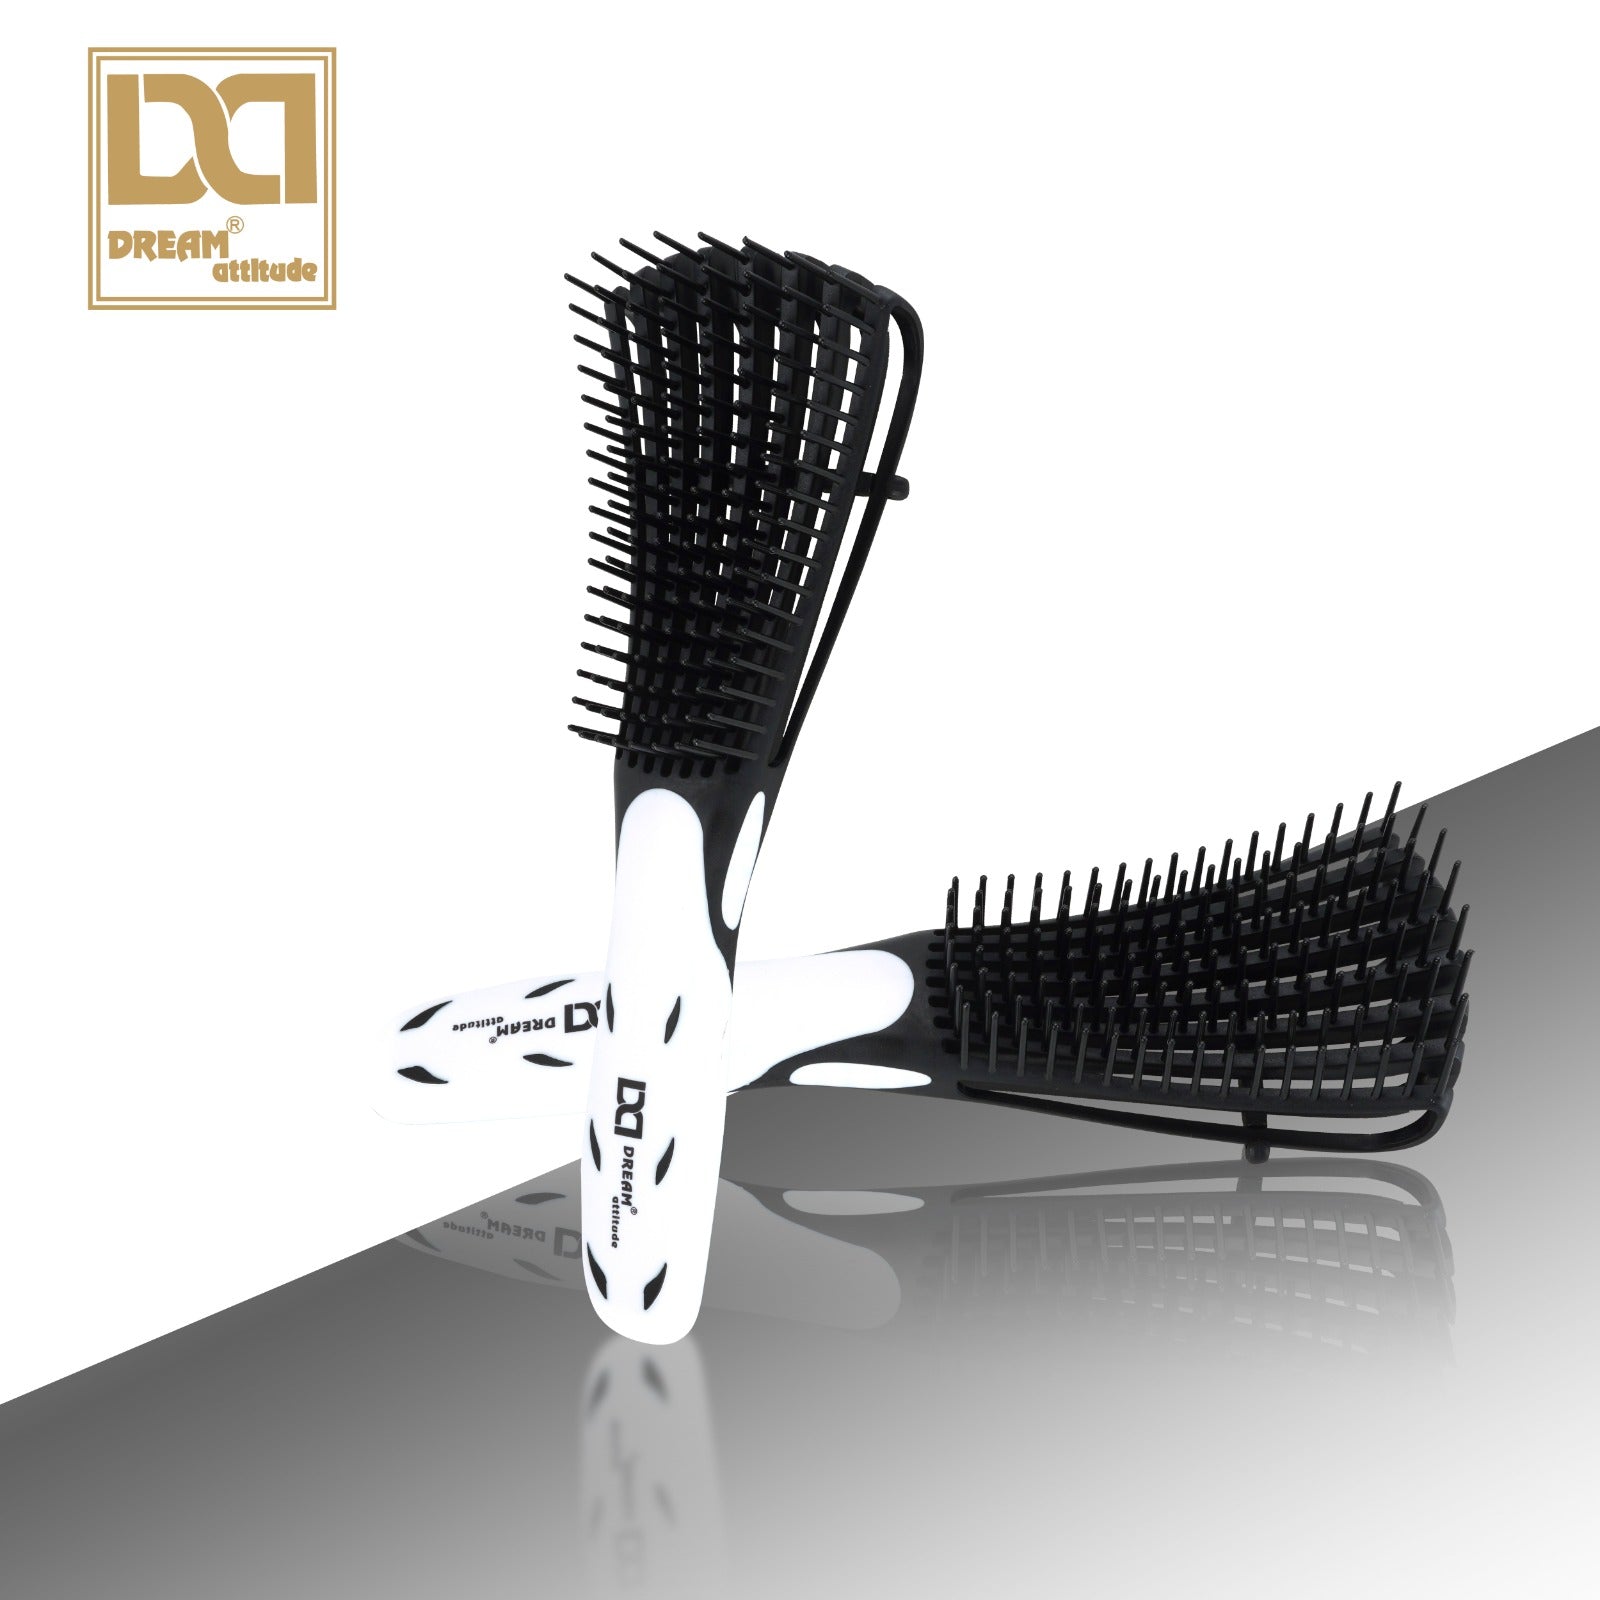 Dive into Luxury: Introducing the DREAM Attitude Jelly Fish Brush